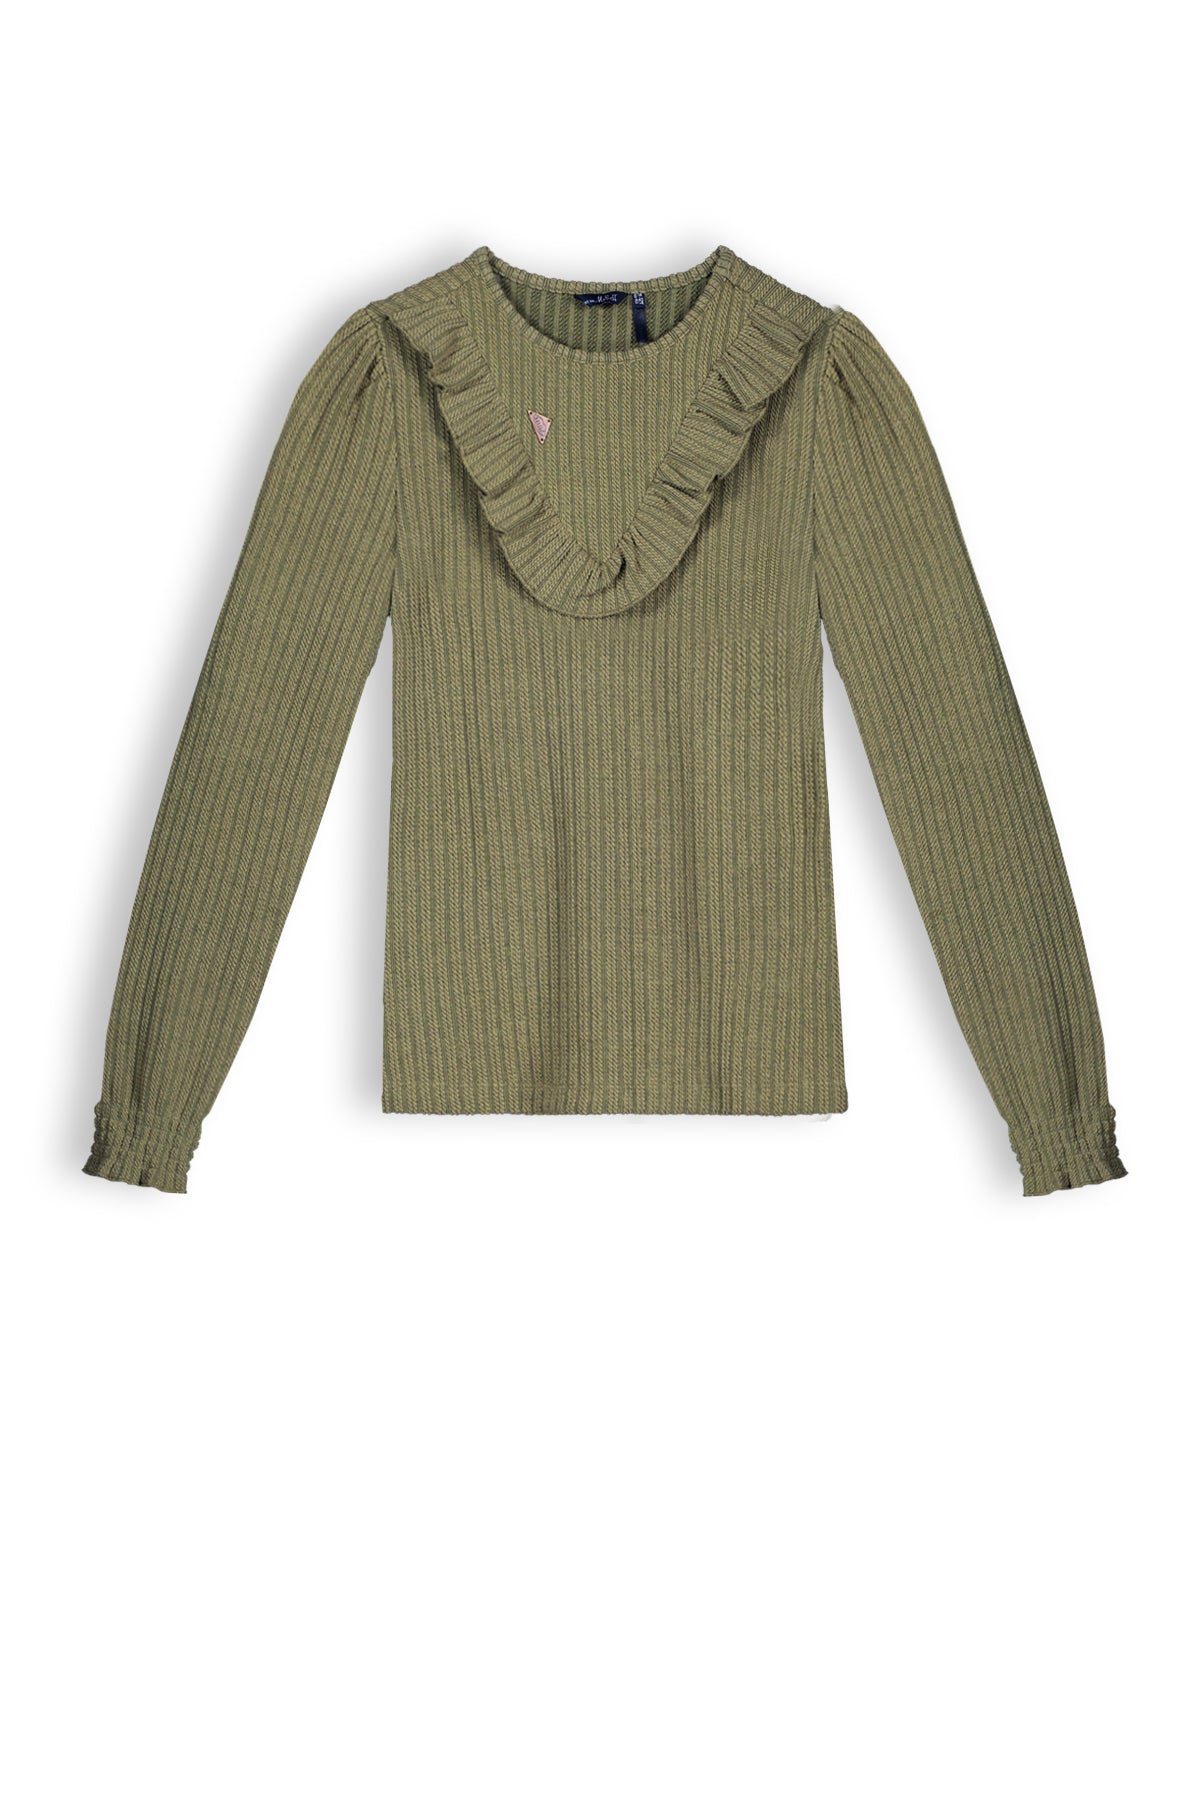 NoBell Kobo girls cable jersey tshirt l/sl olive green